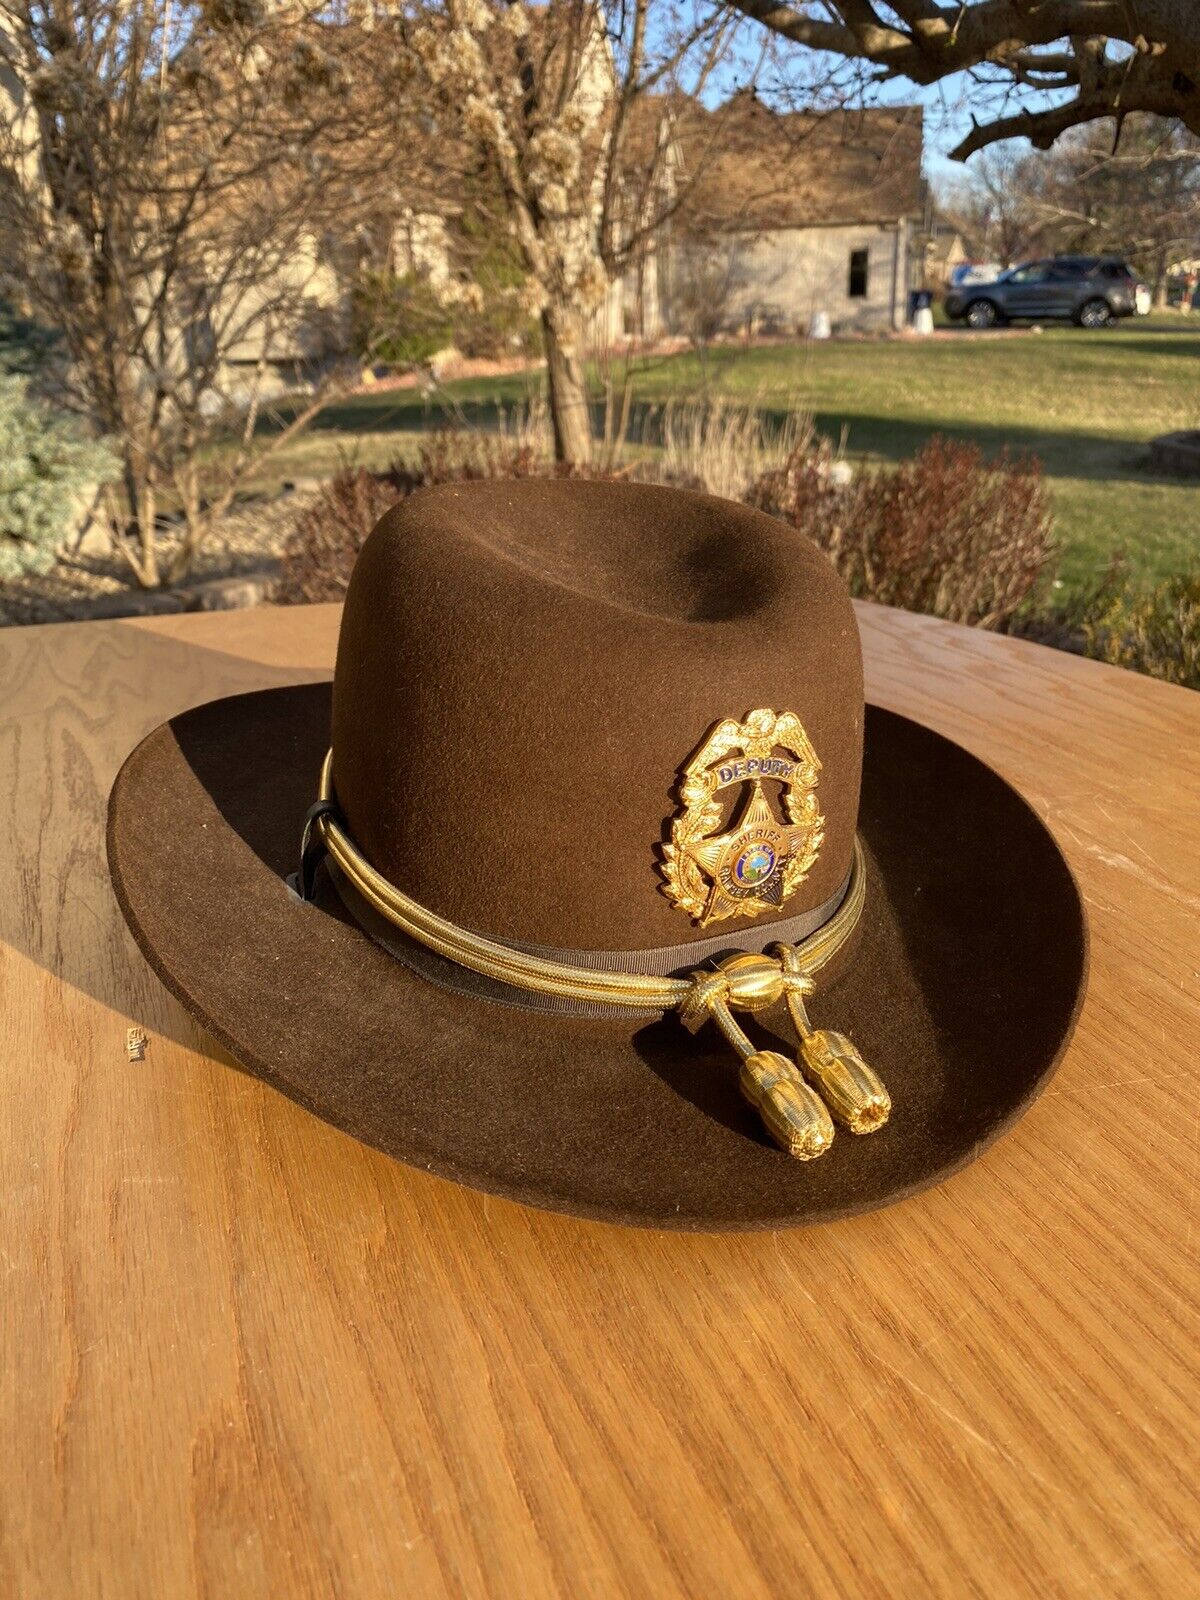 STUNNING Sheriff BEAVER HATS Cowboy Western Hat Incredible Quality  Size 7 3/8